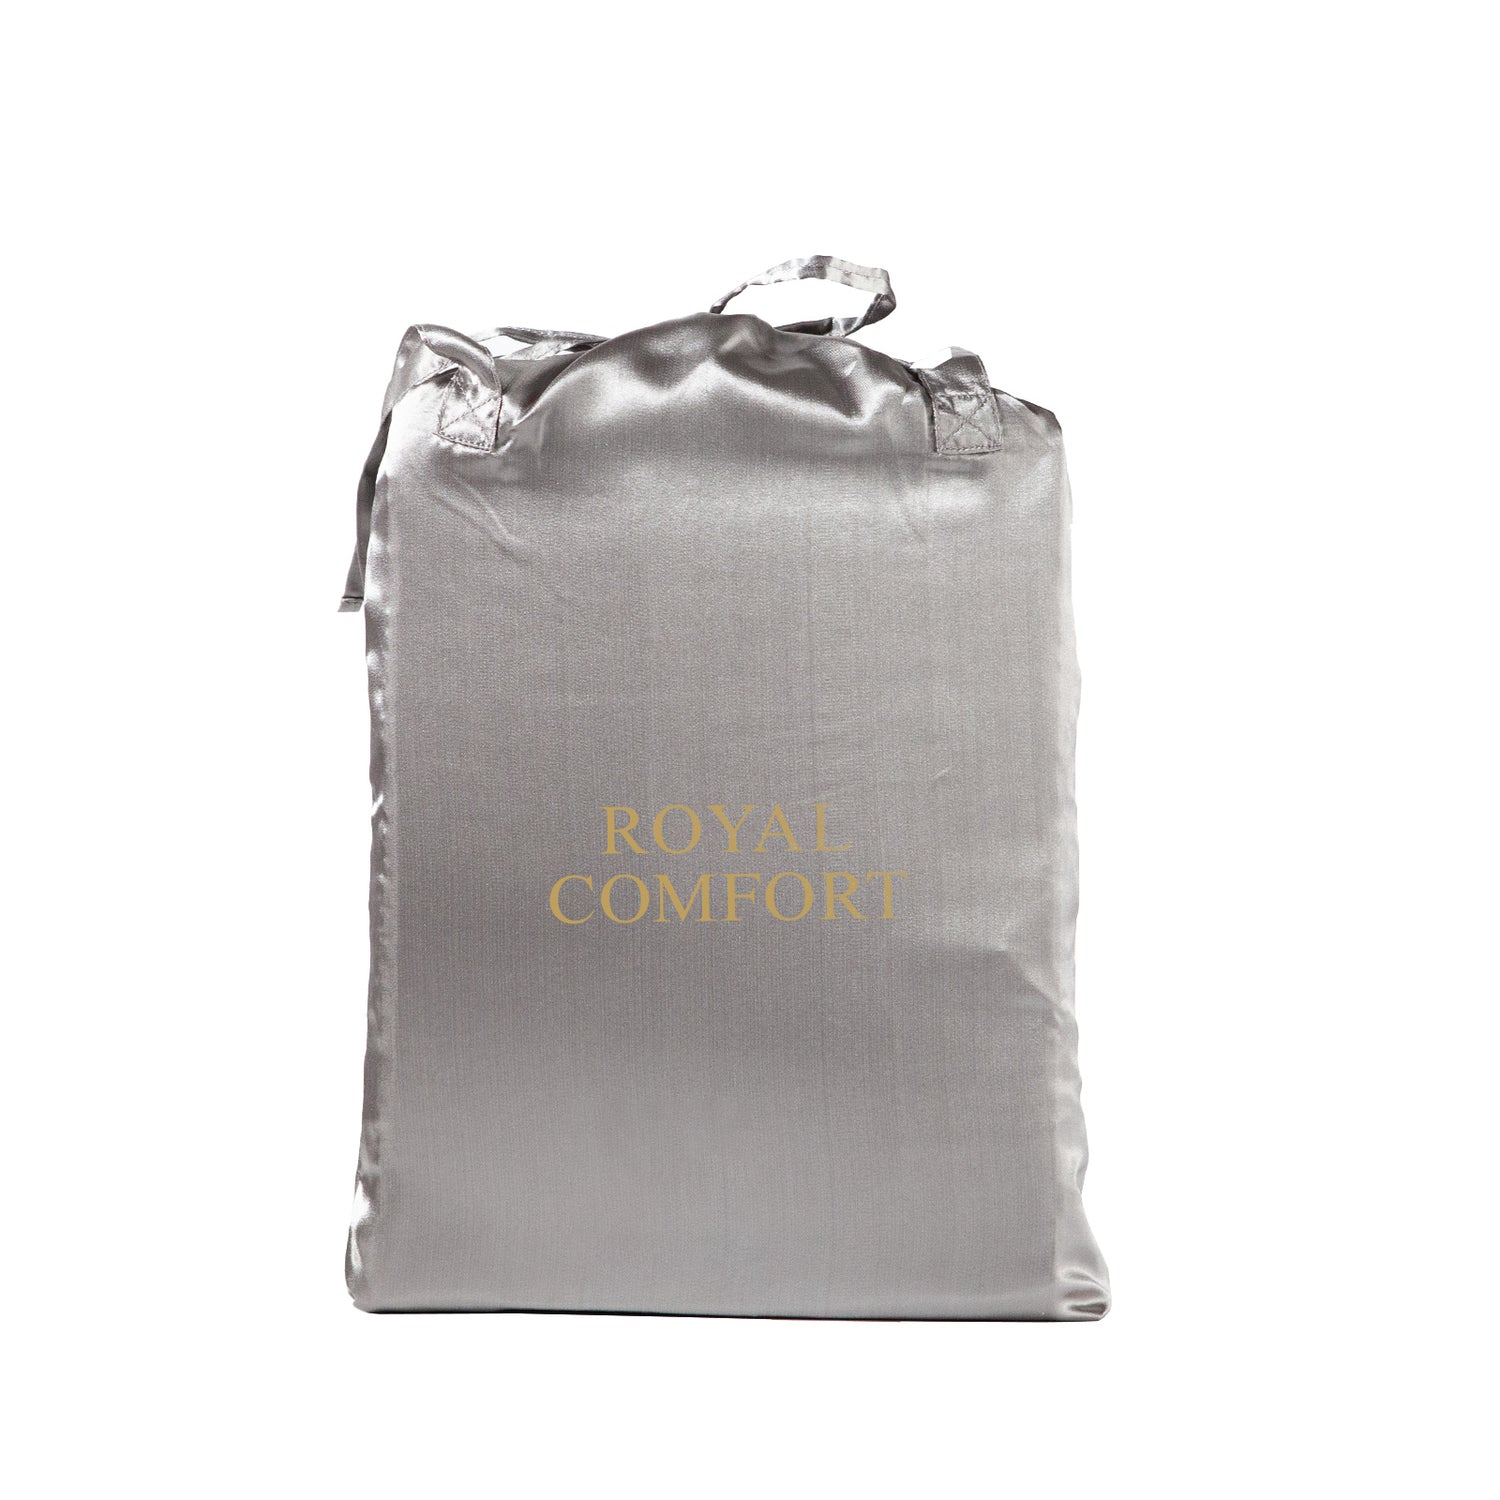 Royal Comfort Satin Sheet Set 3 Piece Fitted Sheet Pillowcase Soft Silky Smooth-Bed Linen-PEROZ Accessories